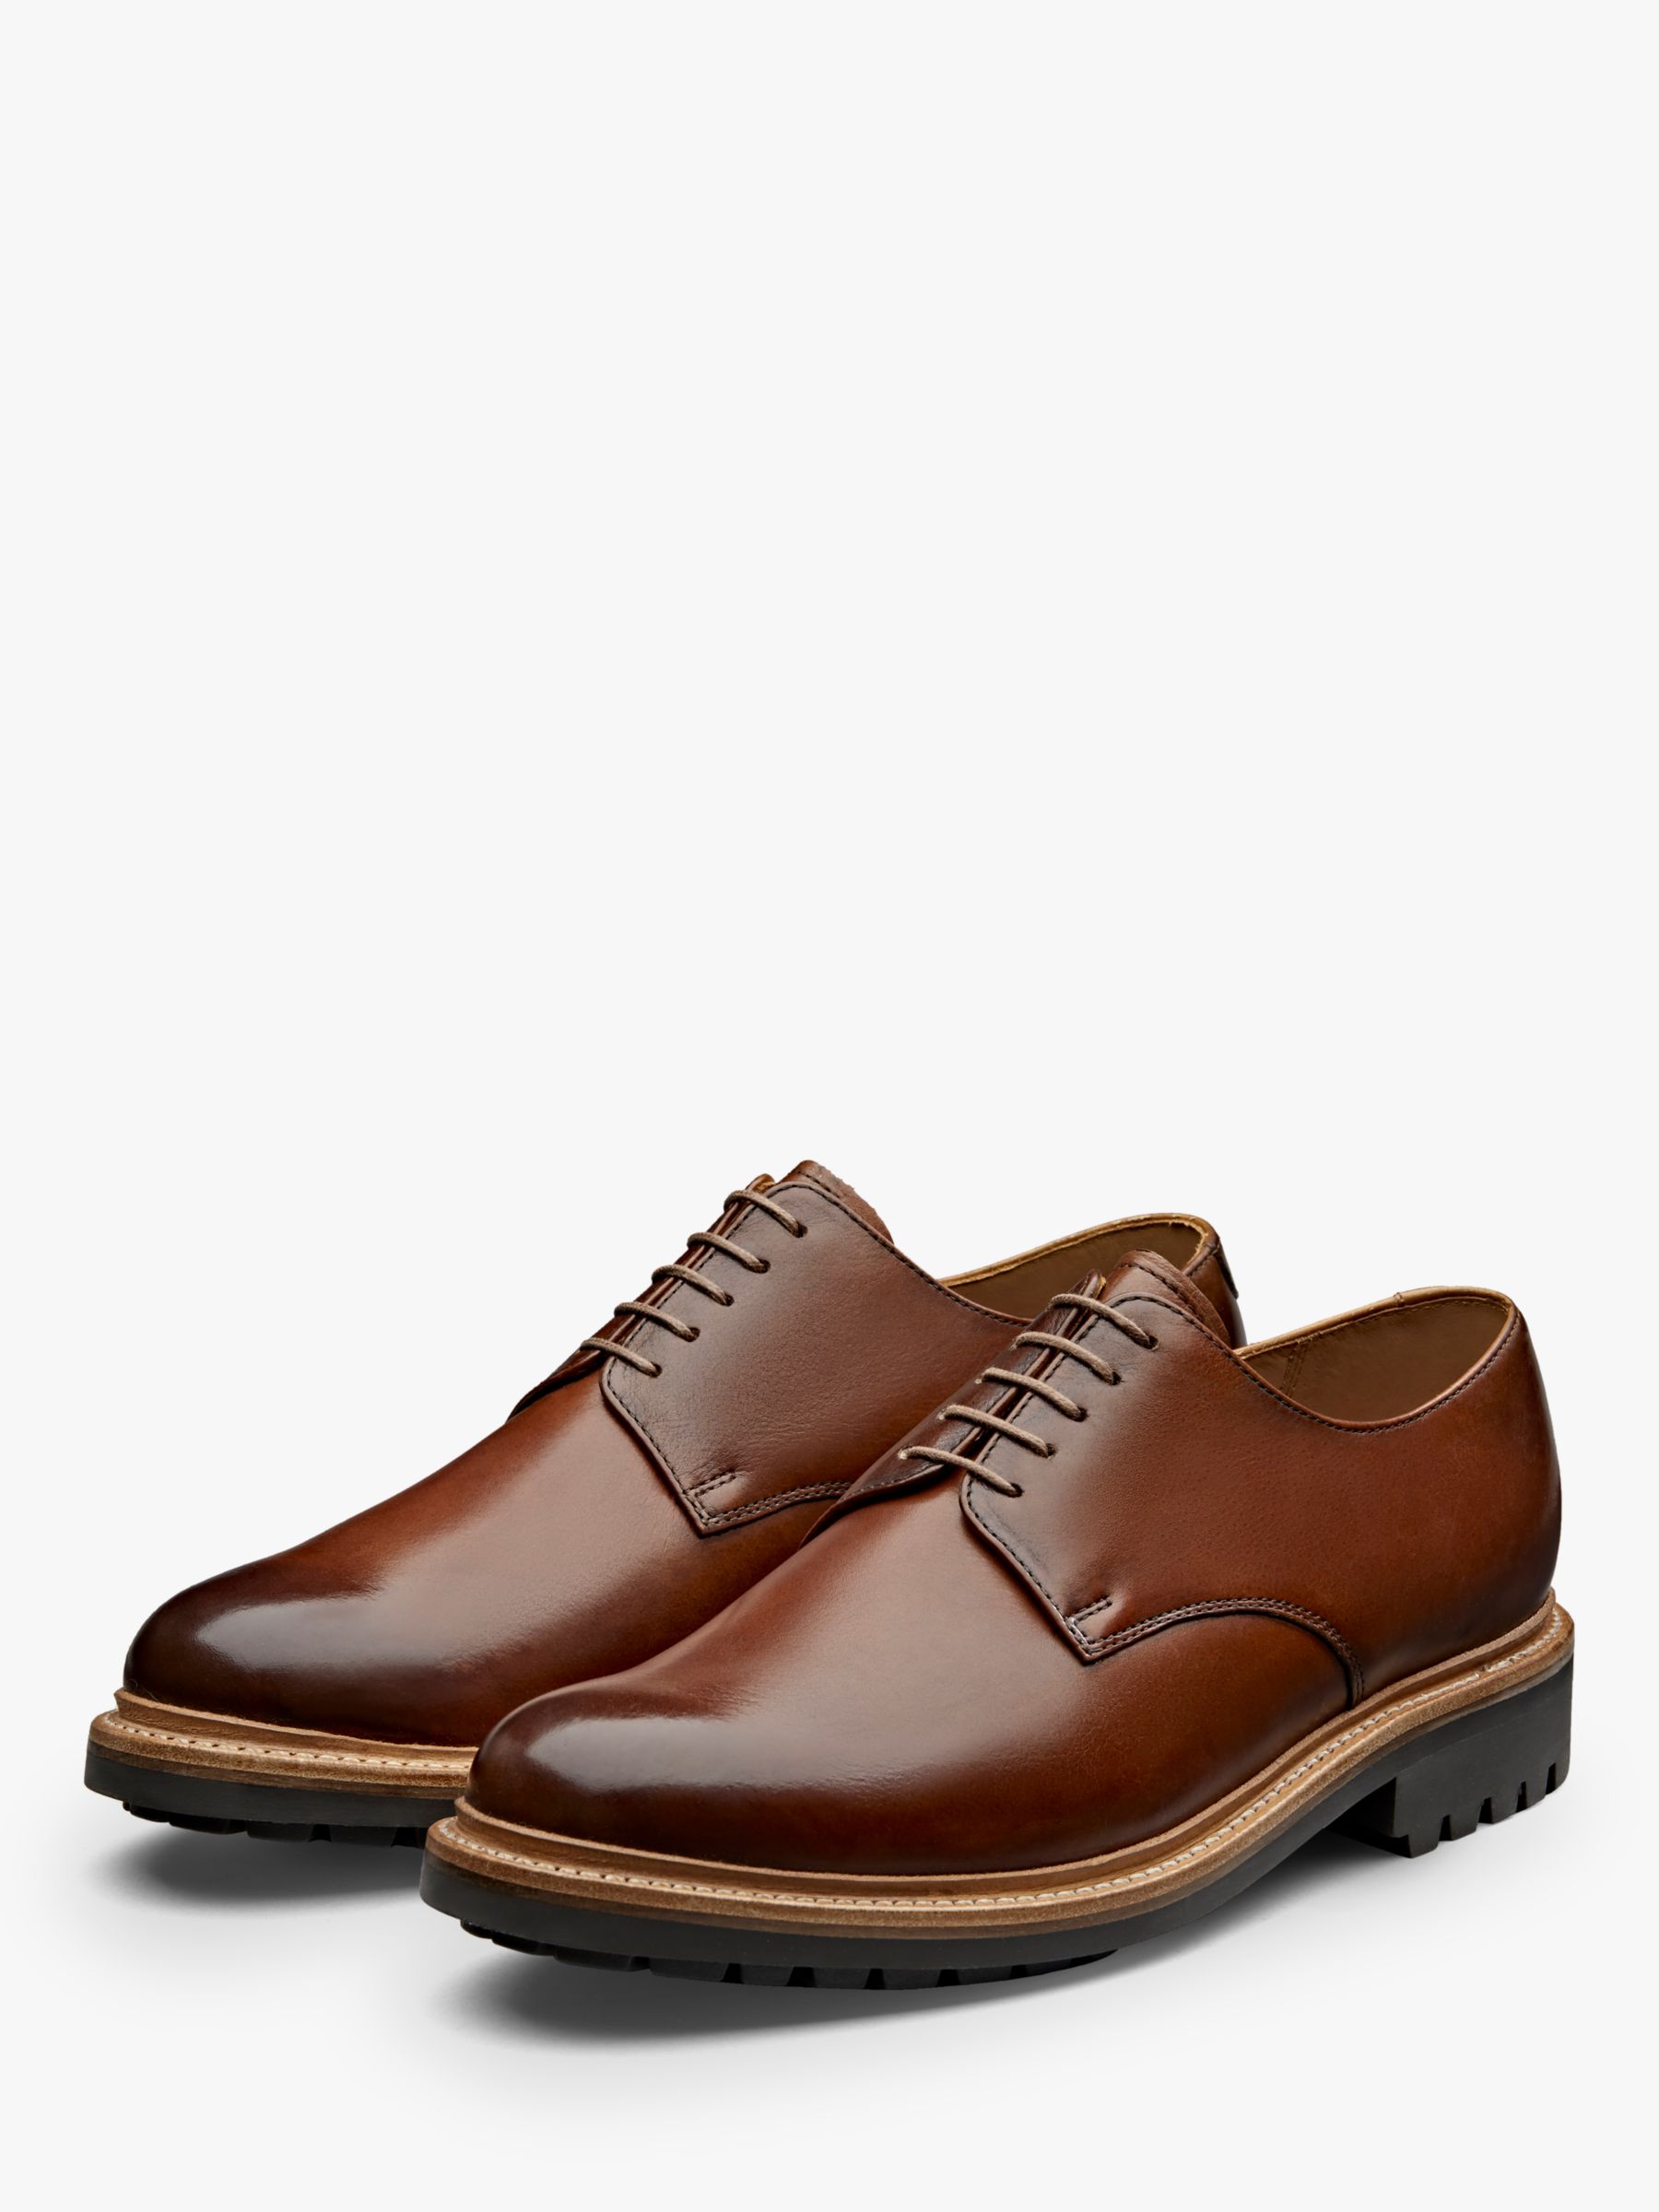 Grenson Curt Leather Derby Shoes, Tan